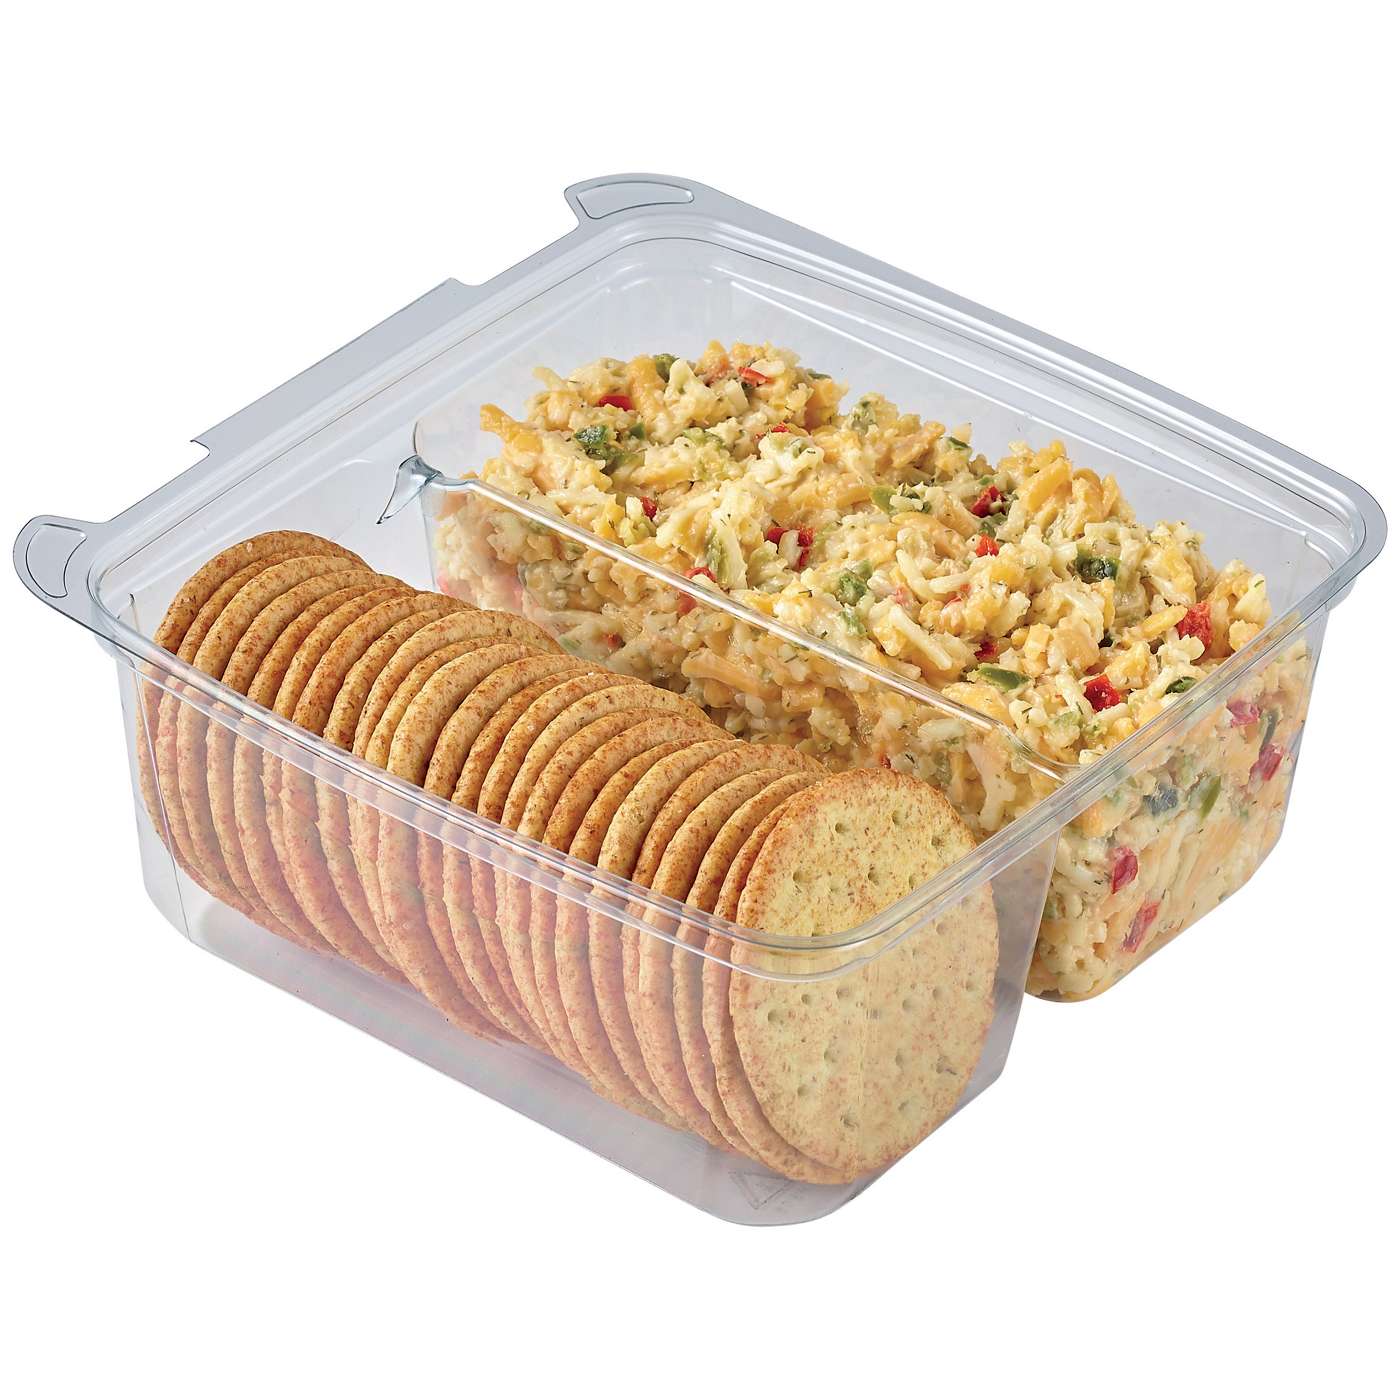 Meal Simple by H-E-B Jalapeño Pimento Cheese Spread & Crackers; image 1 of 3